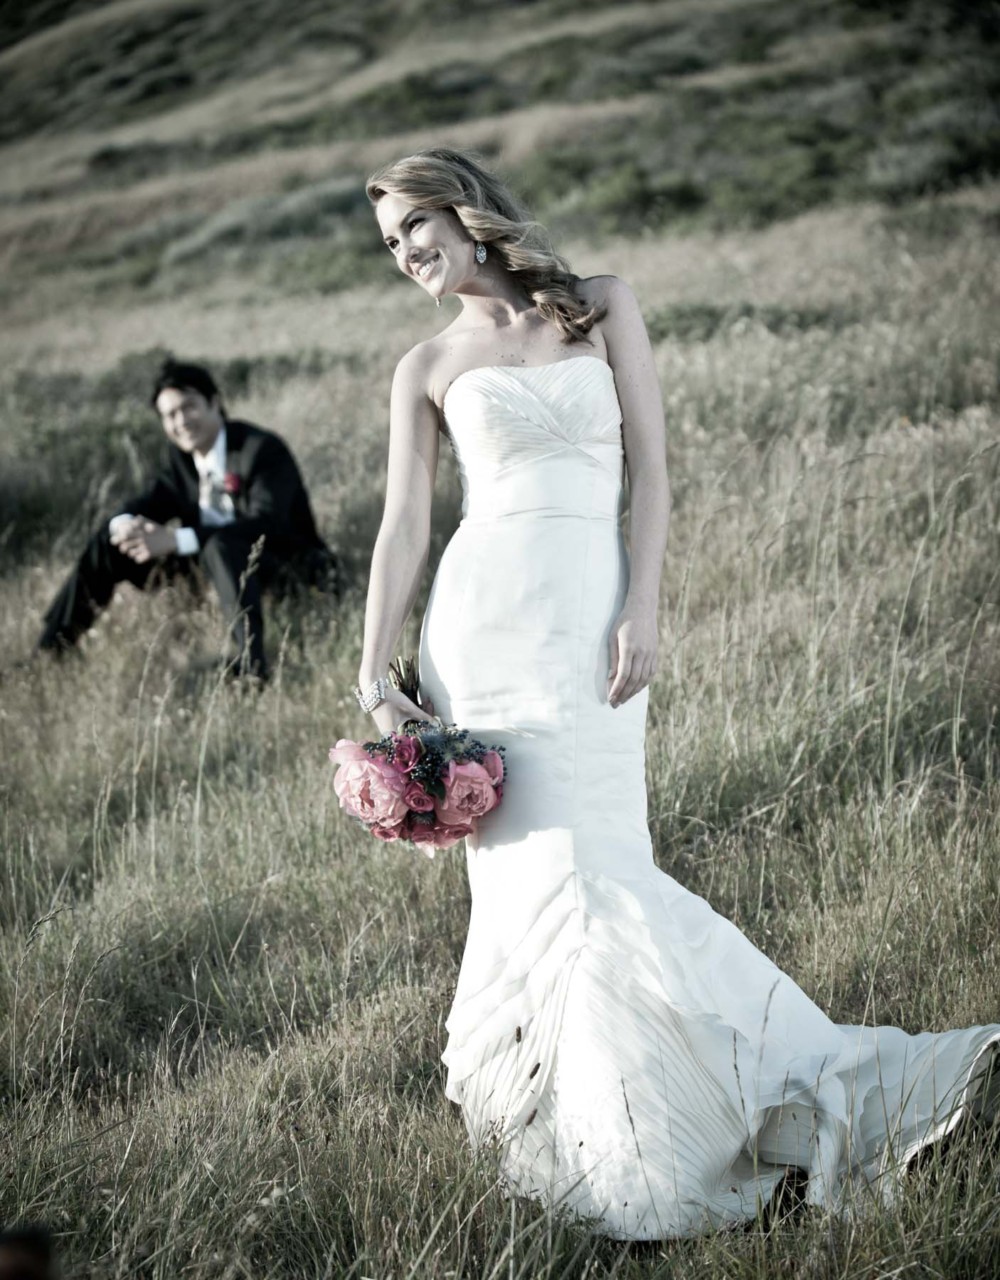 Looking for a event wedding photographer in Eagle River?